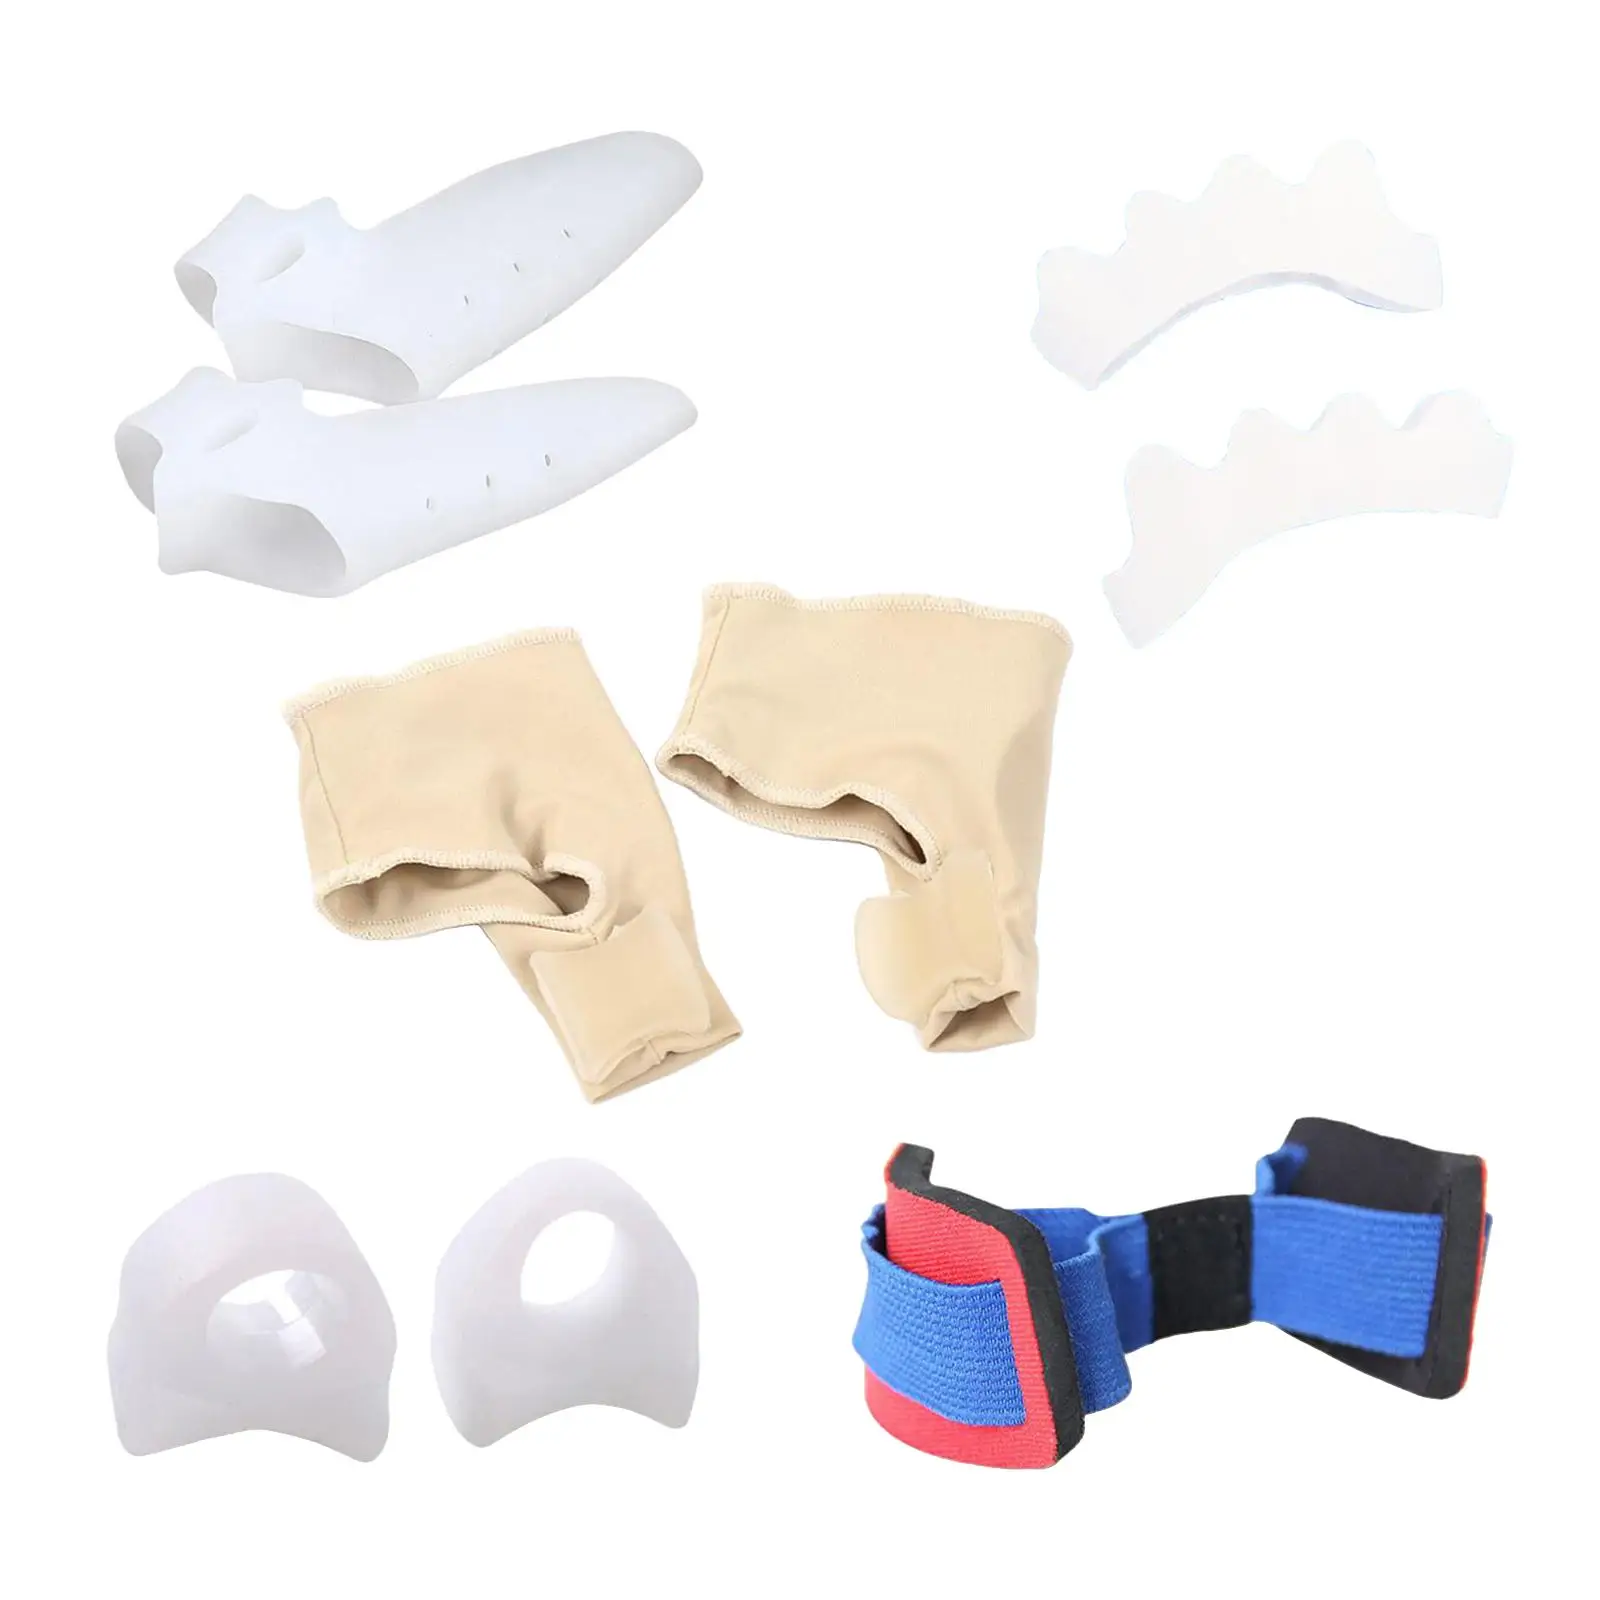 9 Pieces Bunion Corrector Bunion Relief Sleeves Kit, Toe Straightener Toe Spreader Quality Materials for Both Men and Women